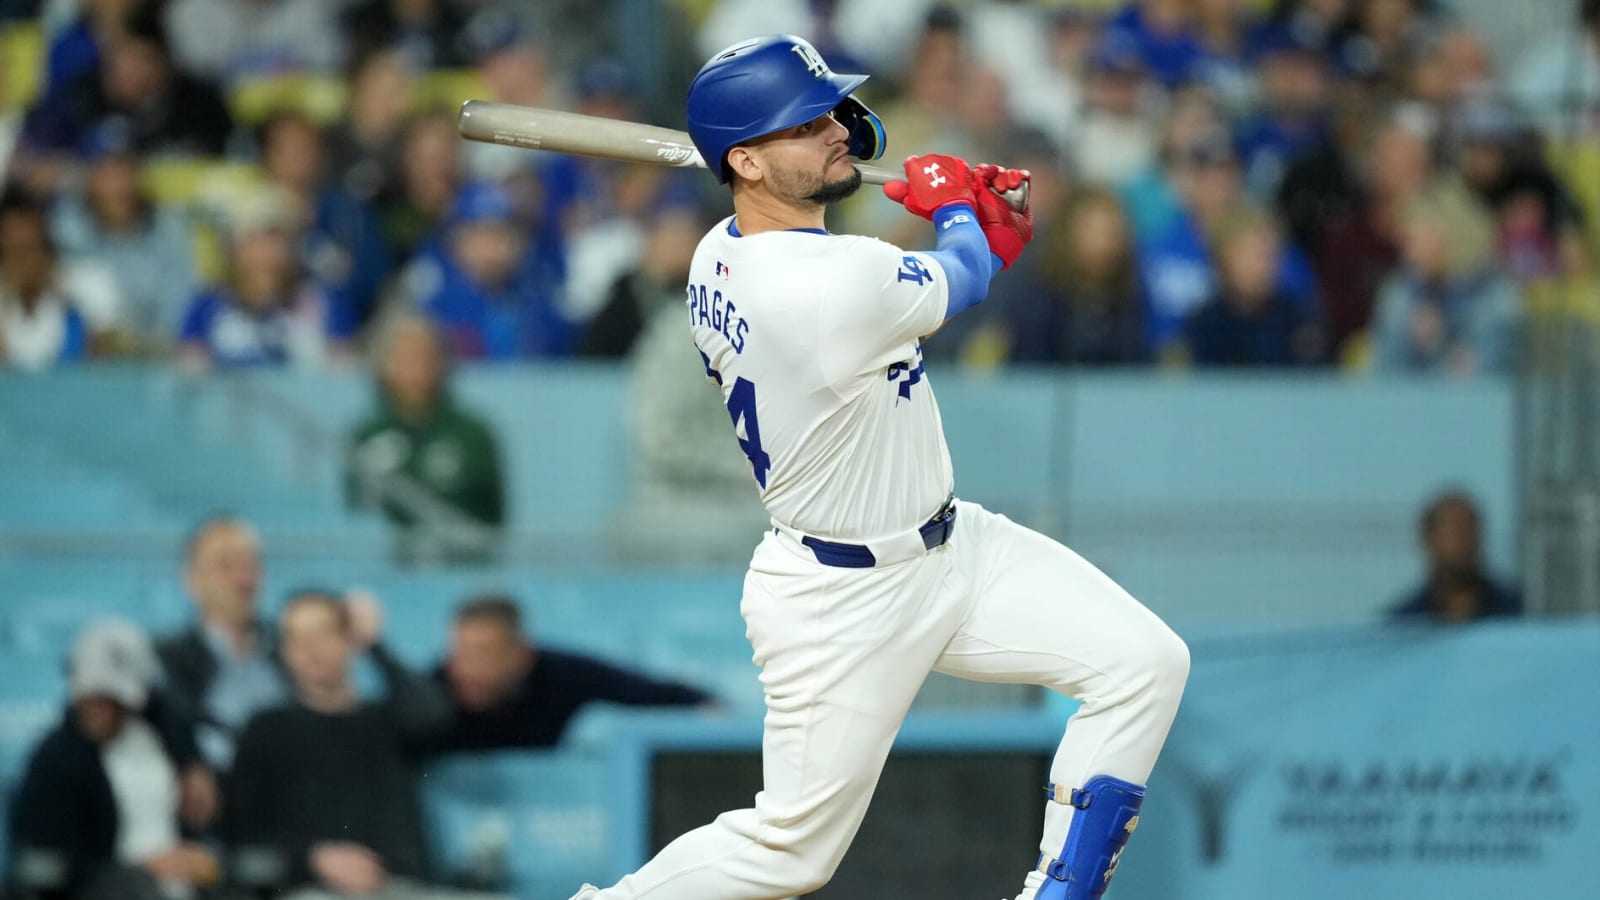 Dodgers rookie outfielder going through first slump in majors